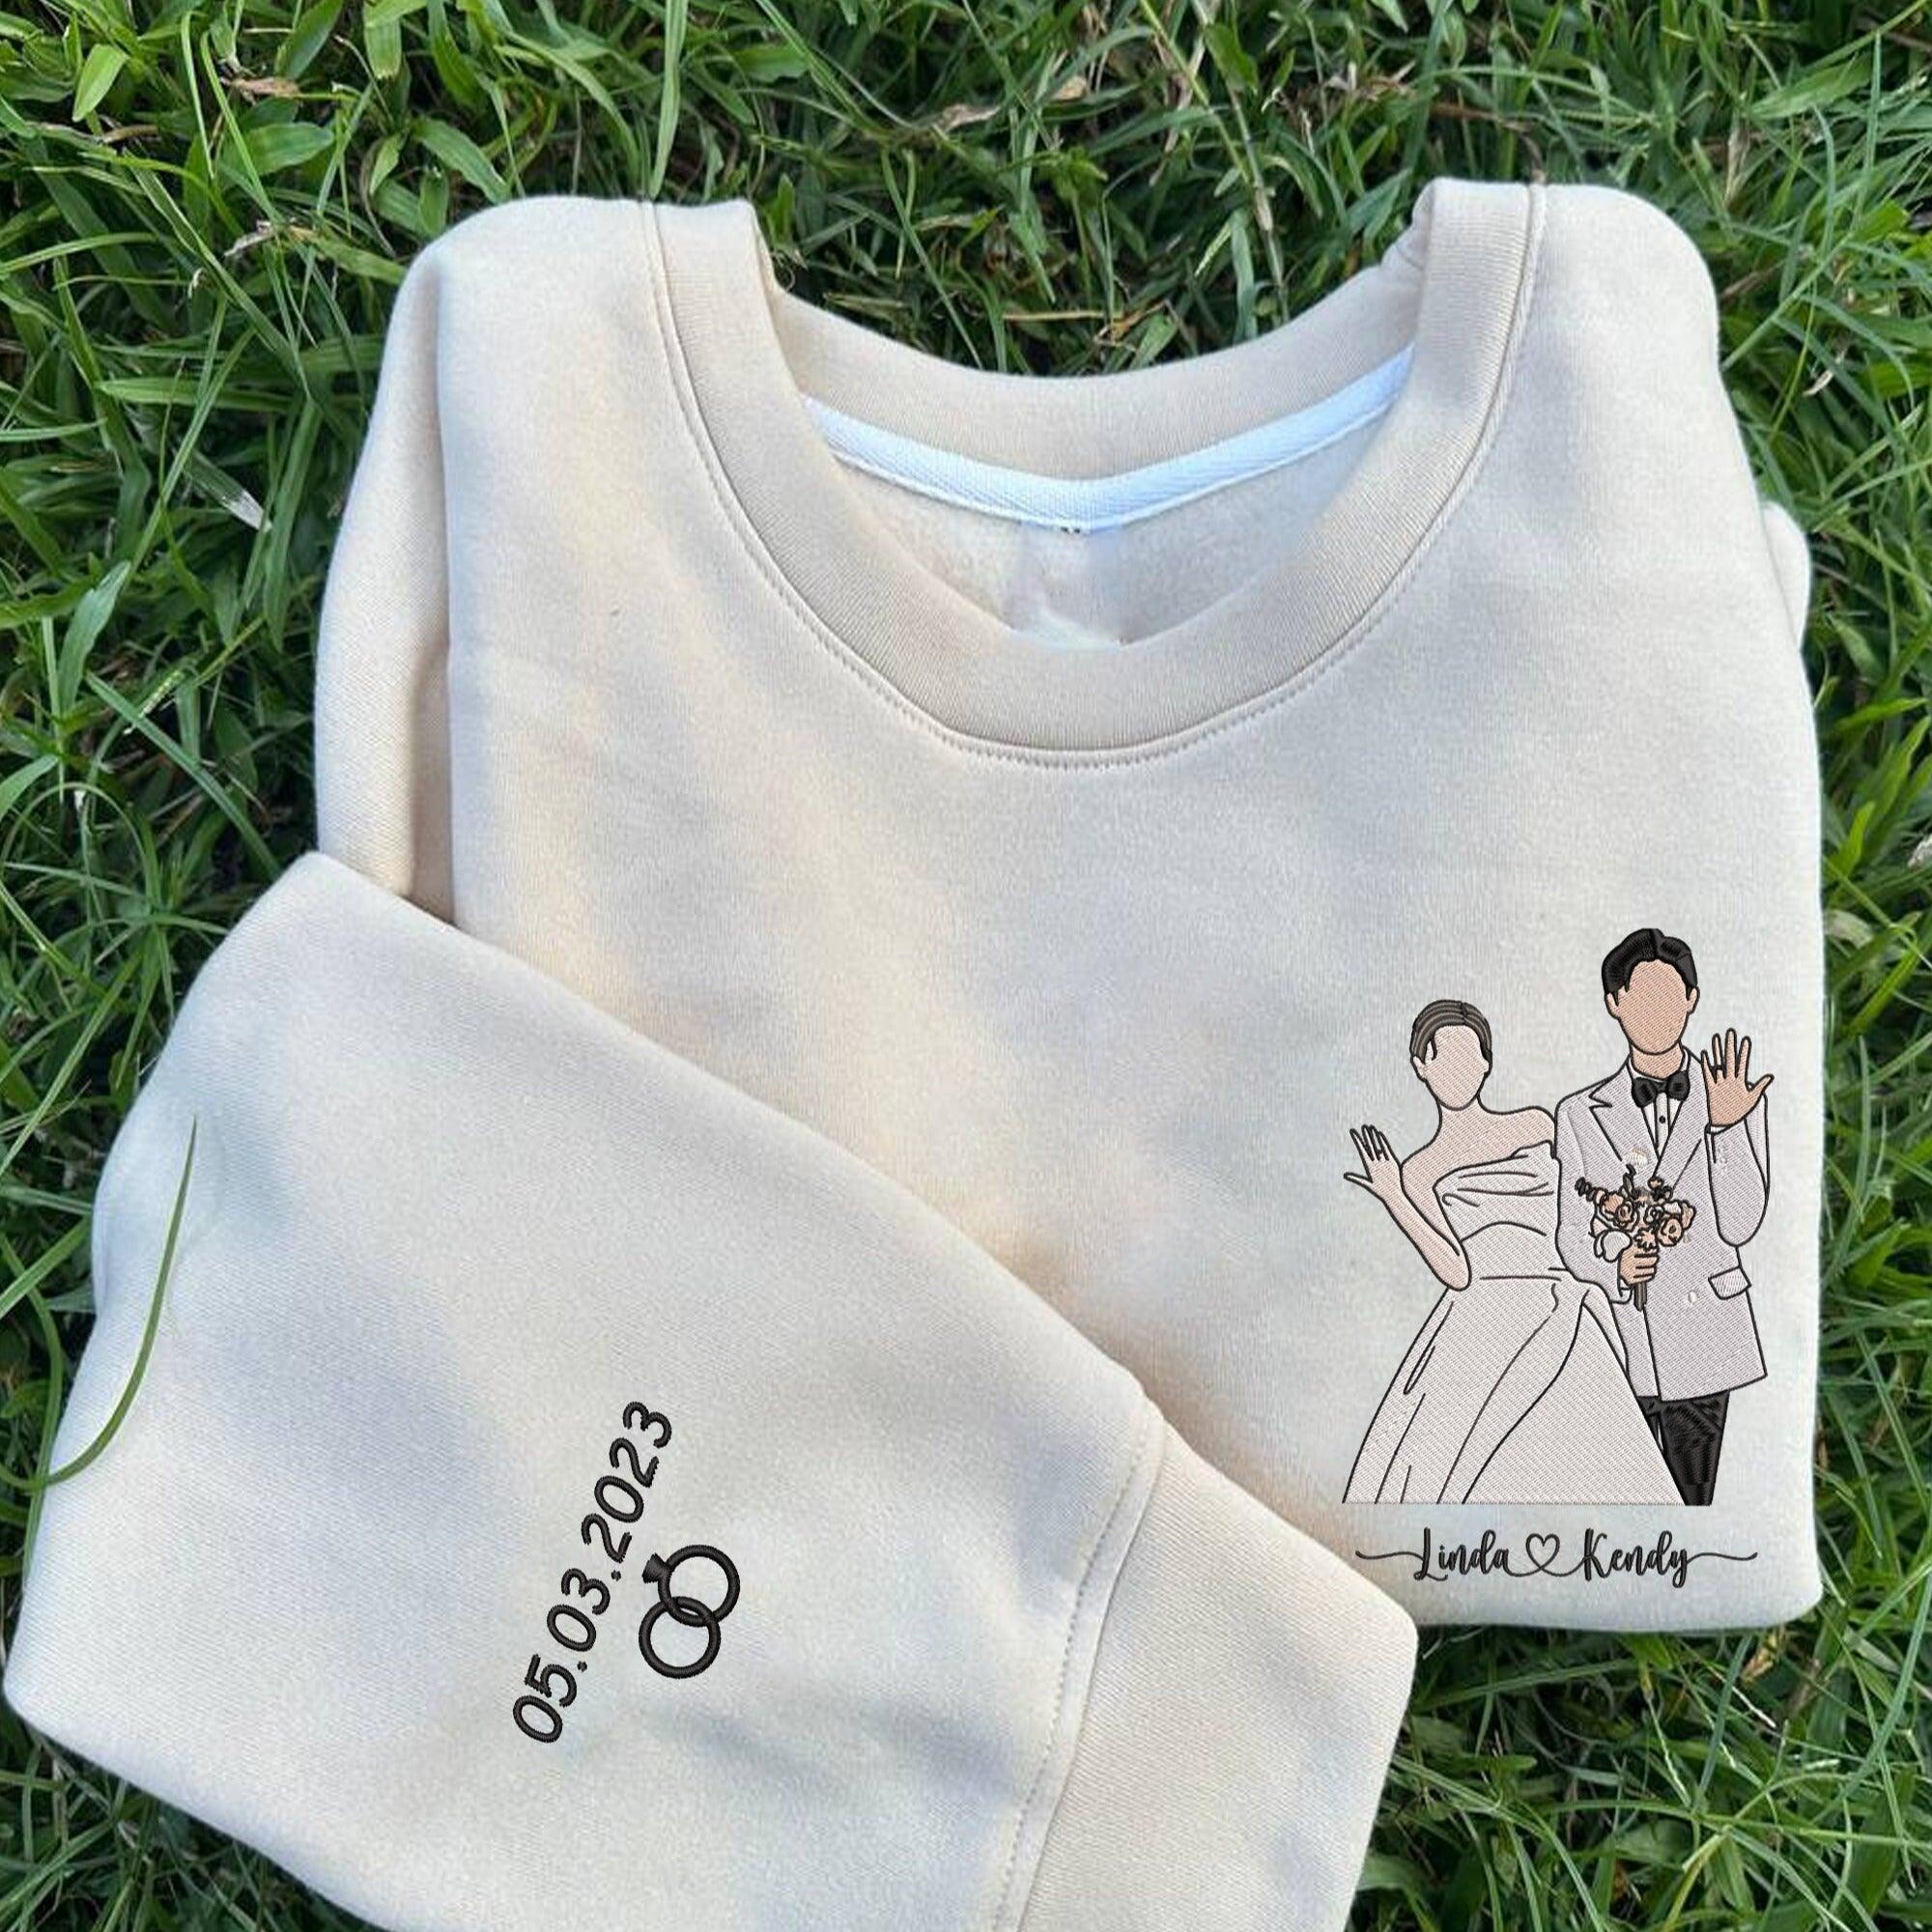 Custom Embroidered Sweatshirts For Couples, Custom Embroidered Portrait From Photo Matching Couple Sweatshirt Hoodie, Custom Photo Embroidered Sweater